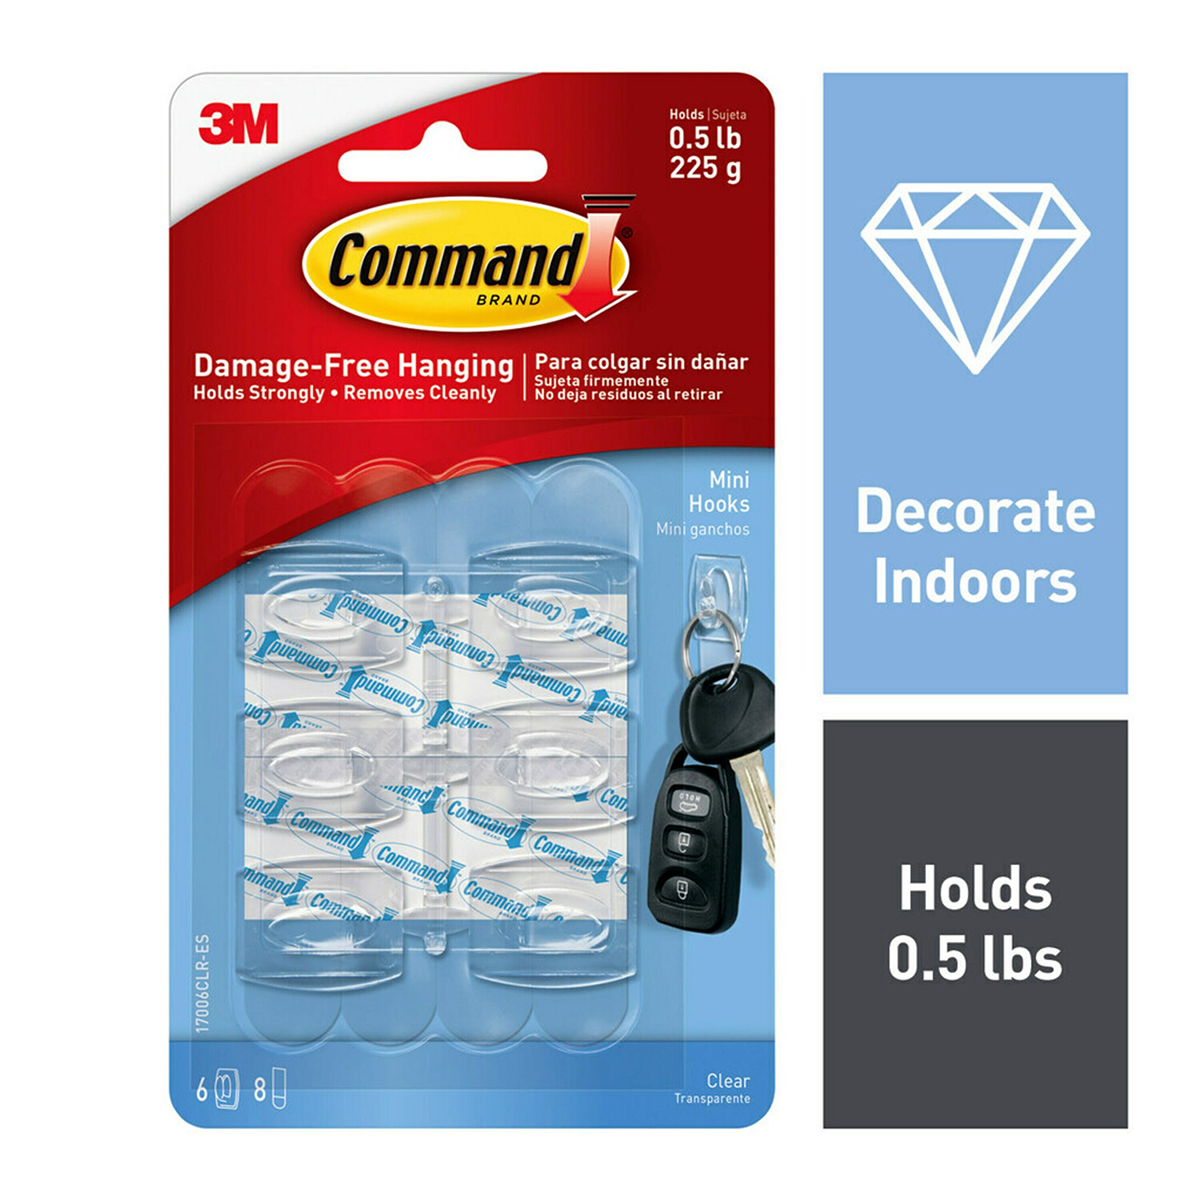 3M Command Adhesive Mini Hooks | The Container Store